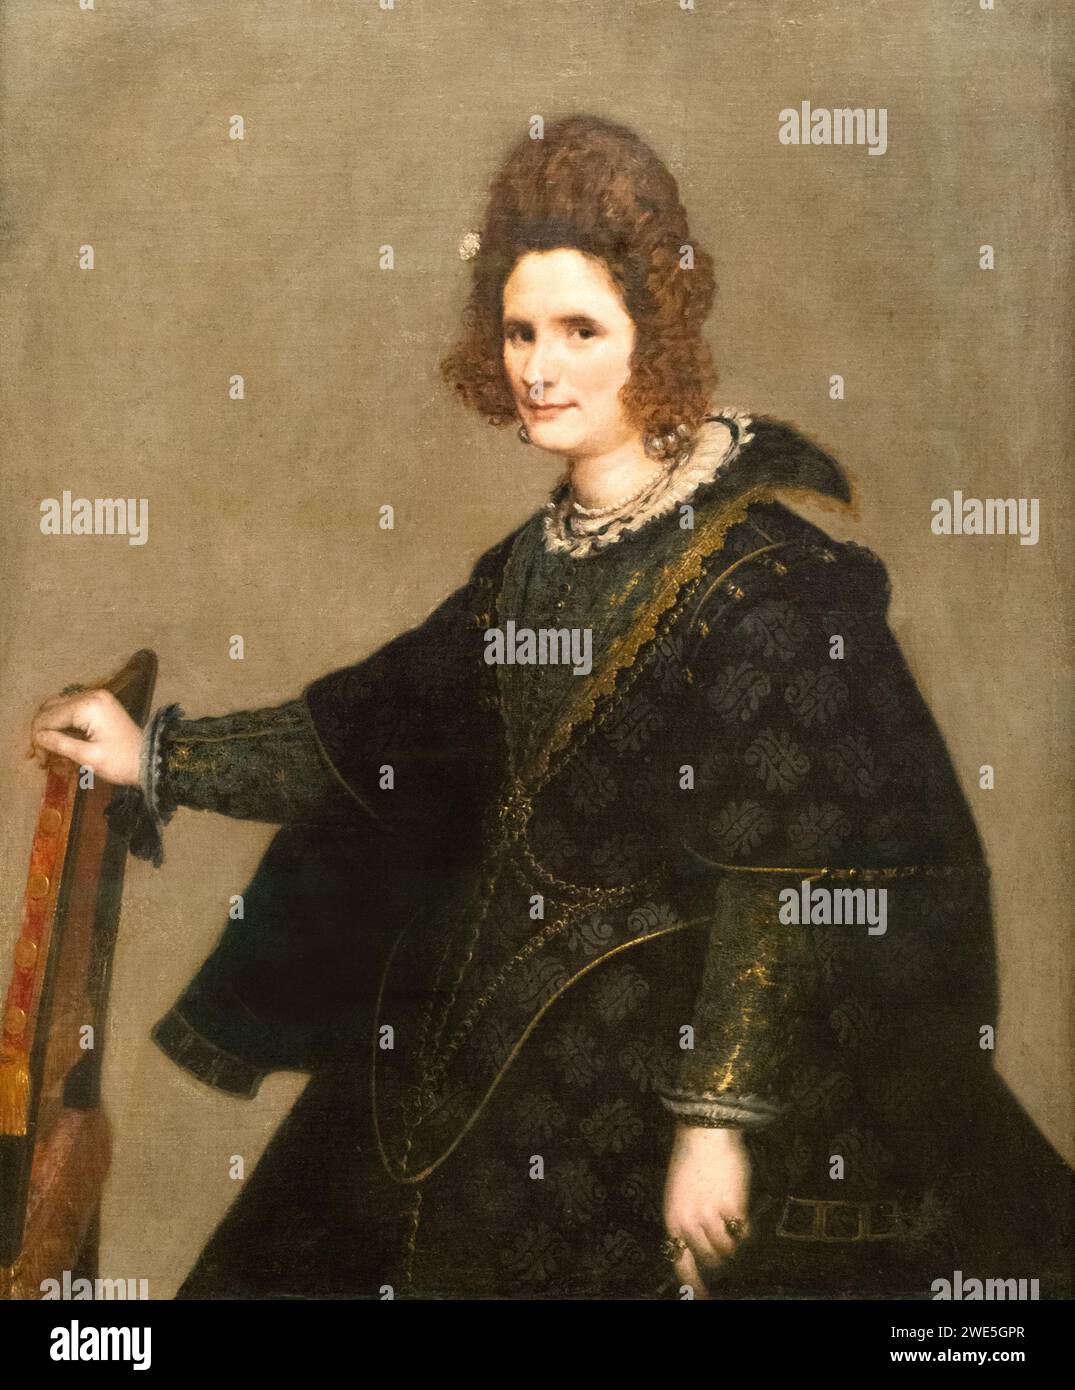 Diego Velazquez painting; "Portrait of a Lady", 1635. A  17th century Spanish painter of the Spanish Golden Age, the 1600s. Portrait of a woman. Stock Photo